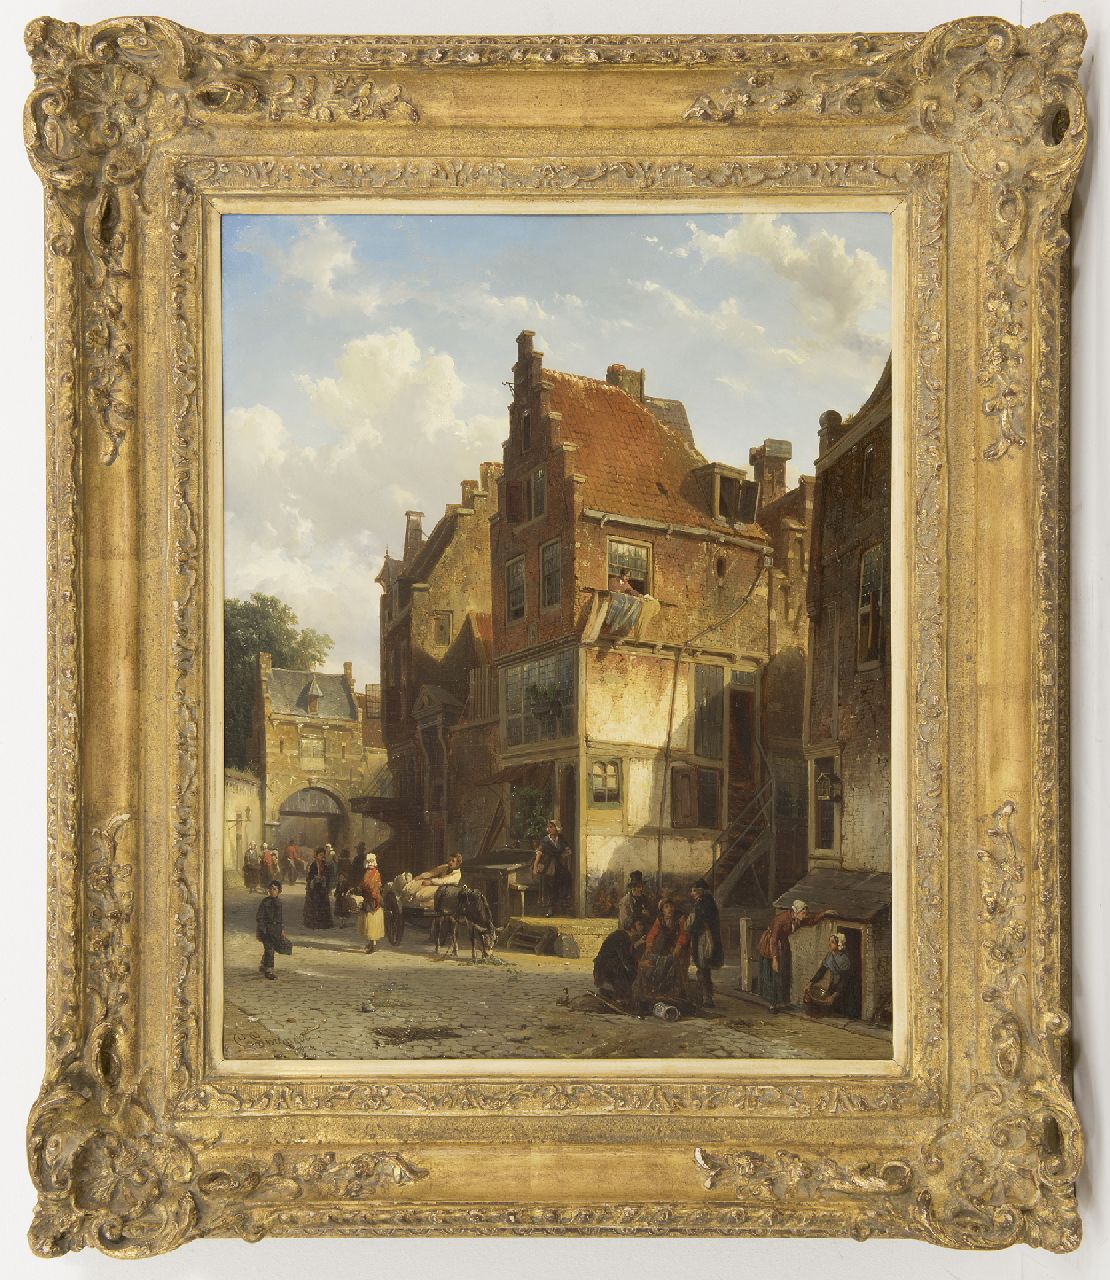 Springer C.  | Cornelis Springer, Daily activities in a Dutch town, oil on panel 49.0 x 39.0 cm, signed l.l., l.r. and on the reverse and dated '58